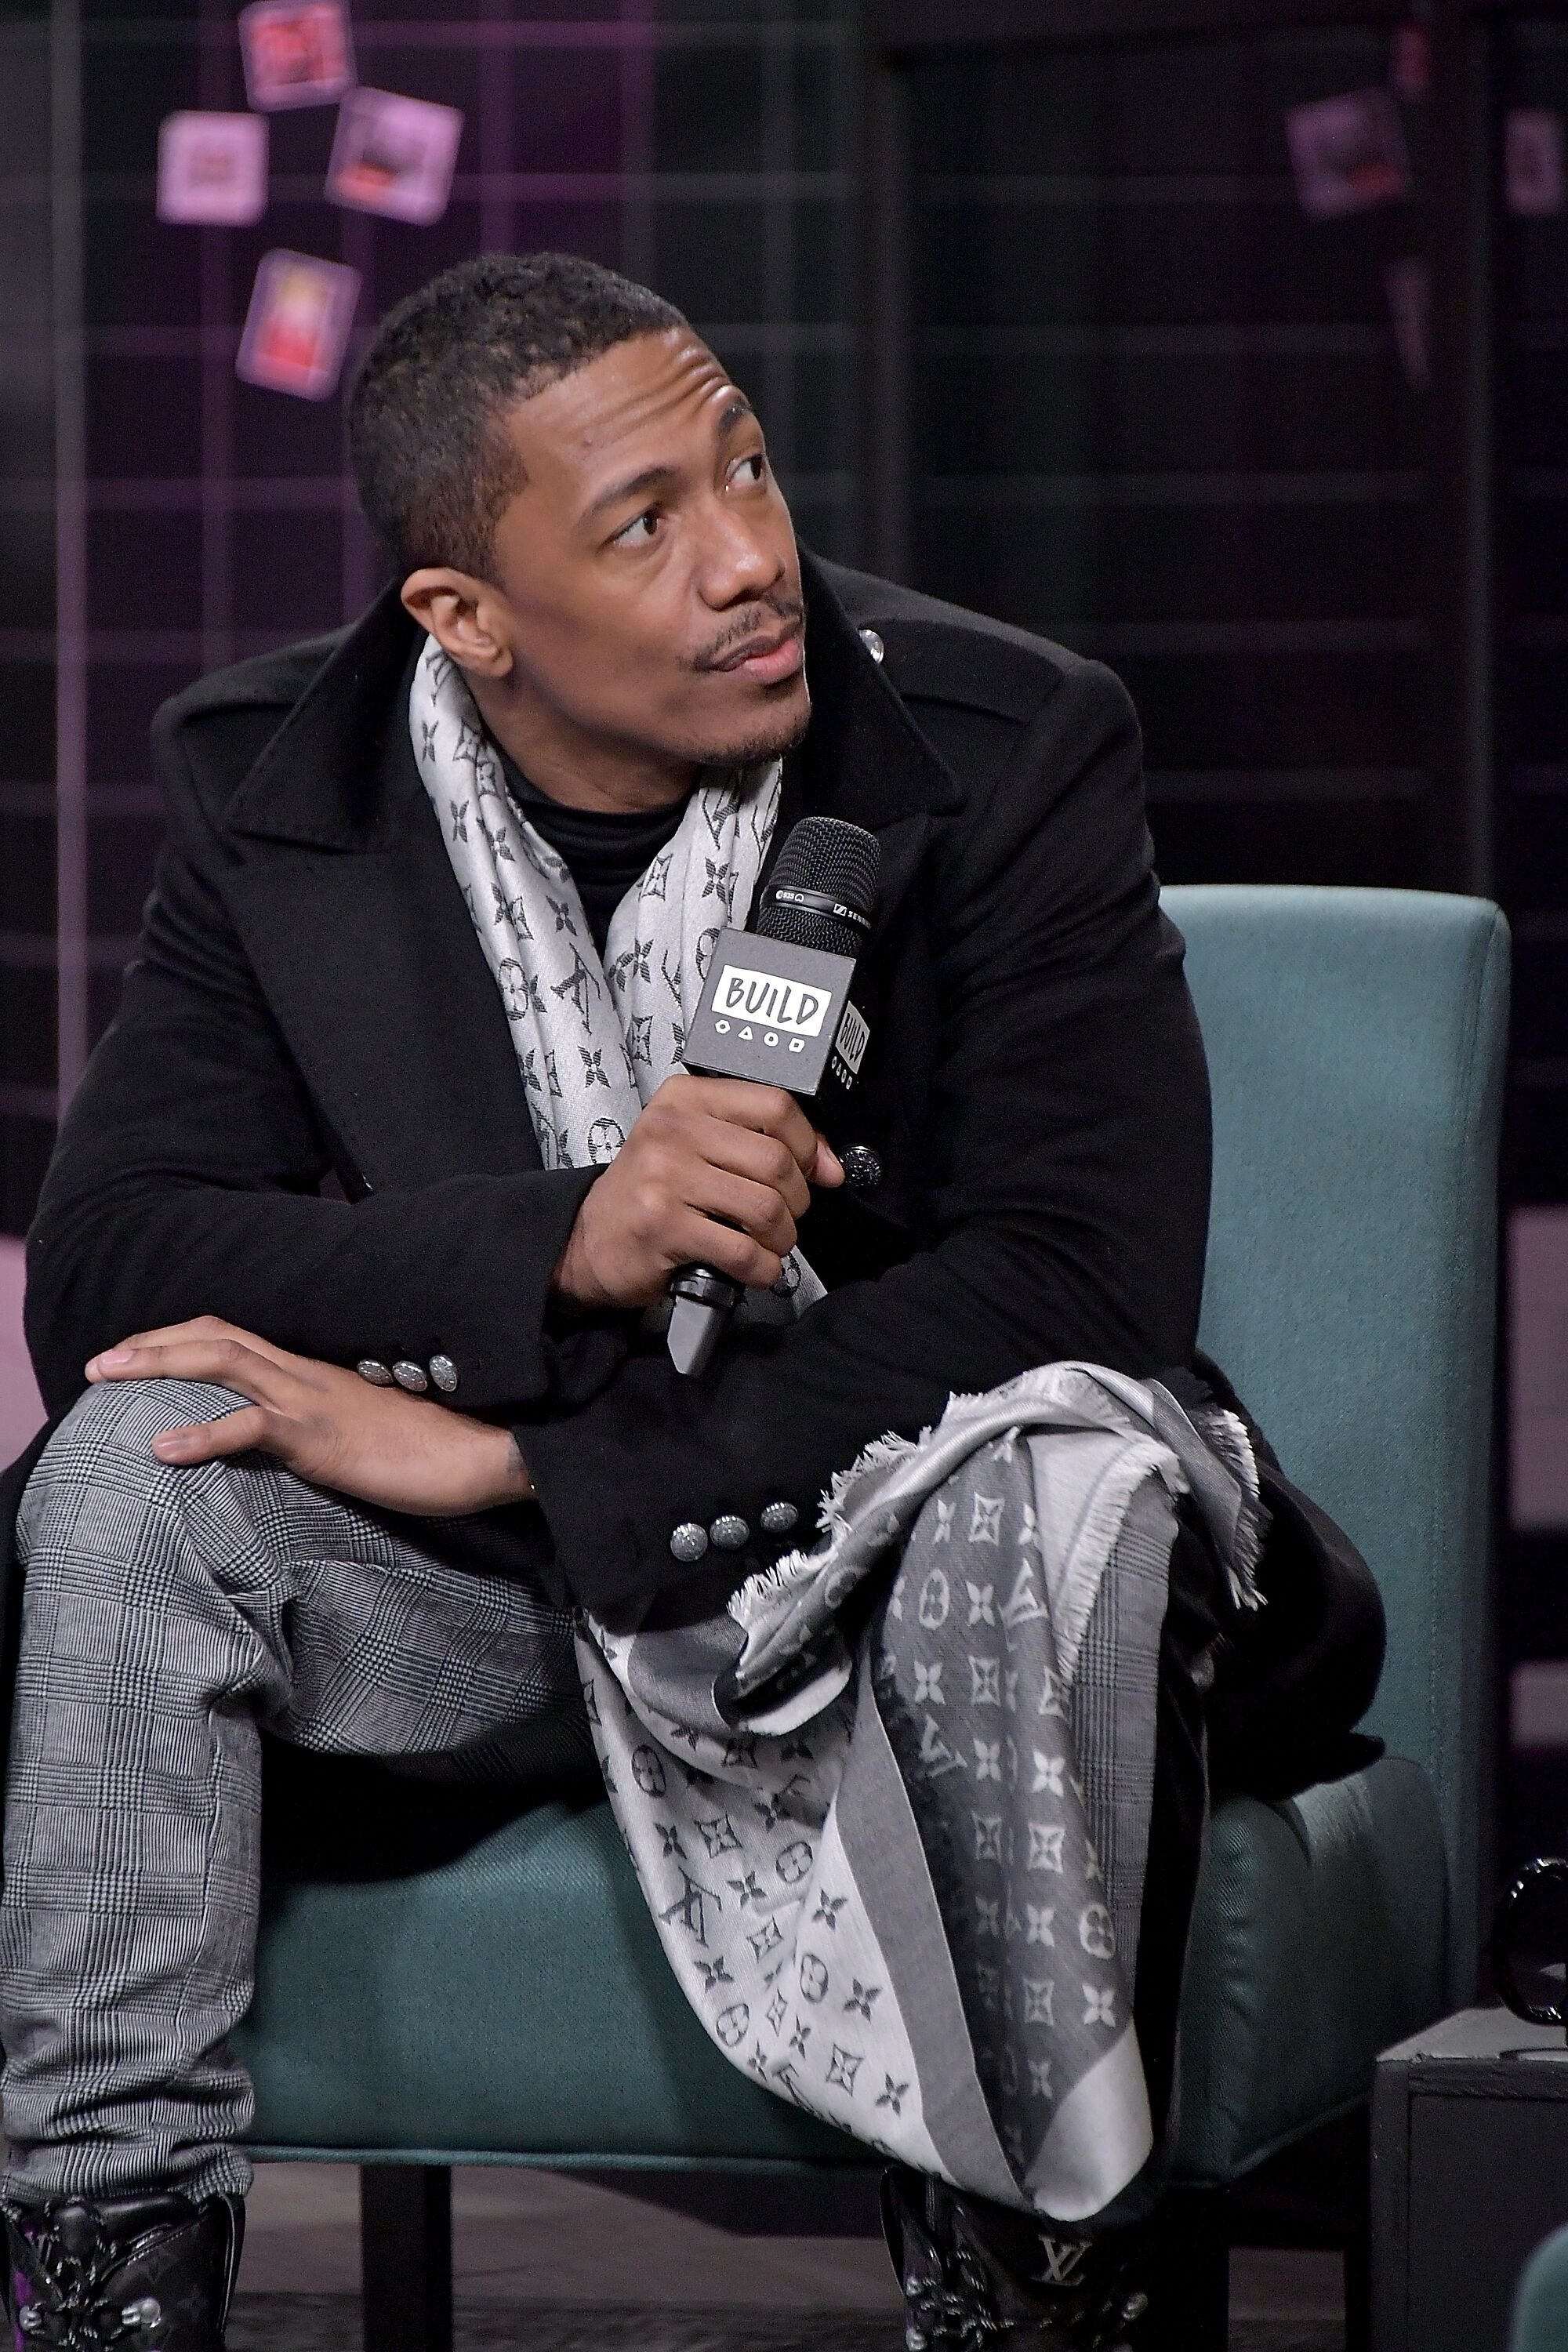 Nick Cannon at one of his speaking engagements | Source: Getty Images/GlobalImagesUkraine